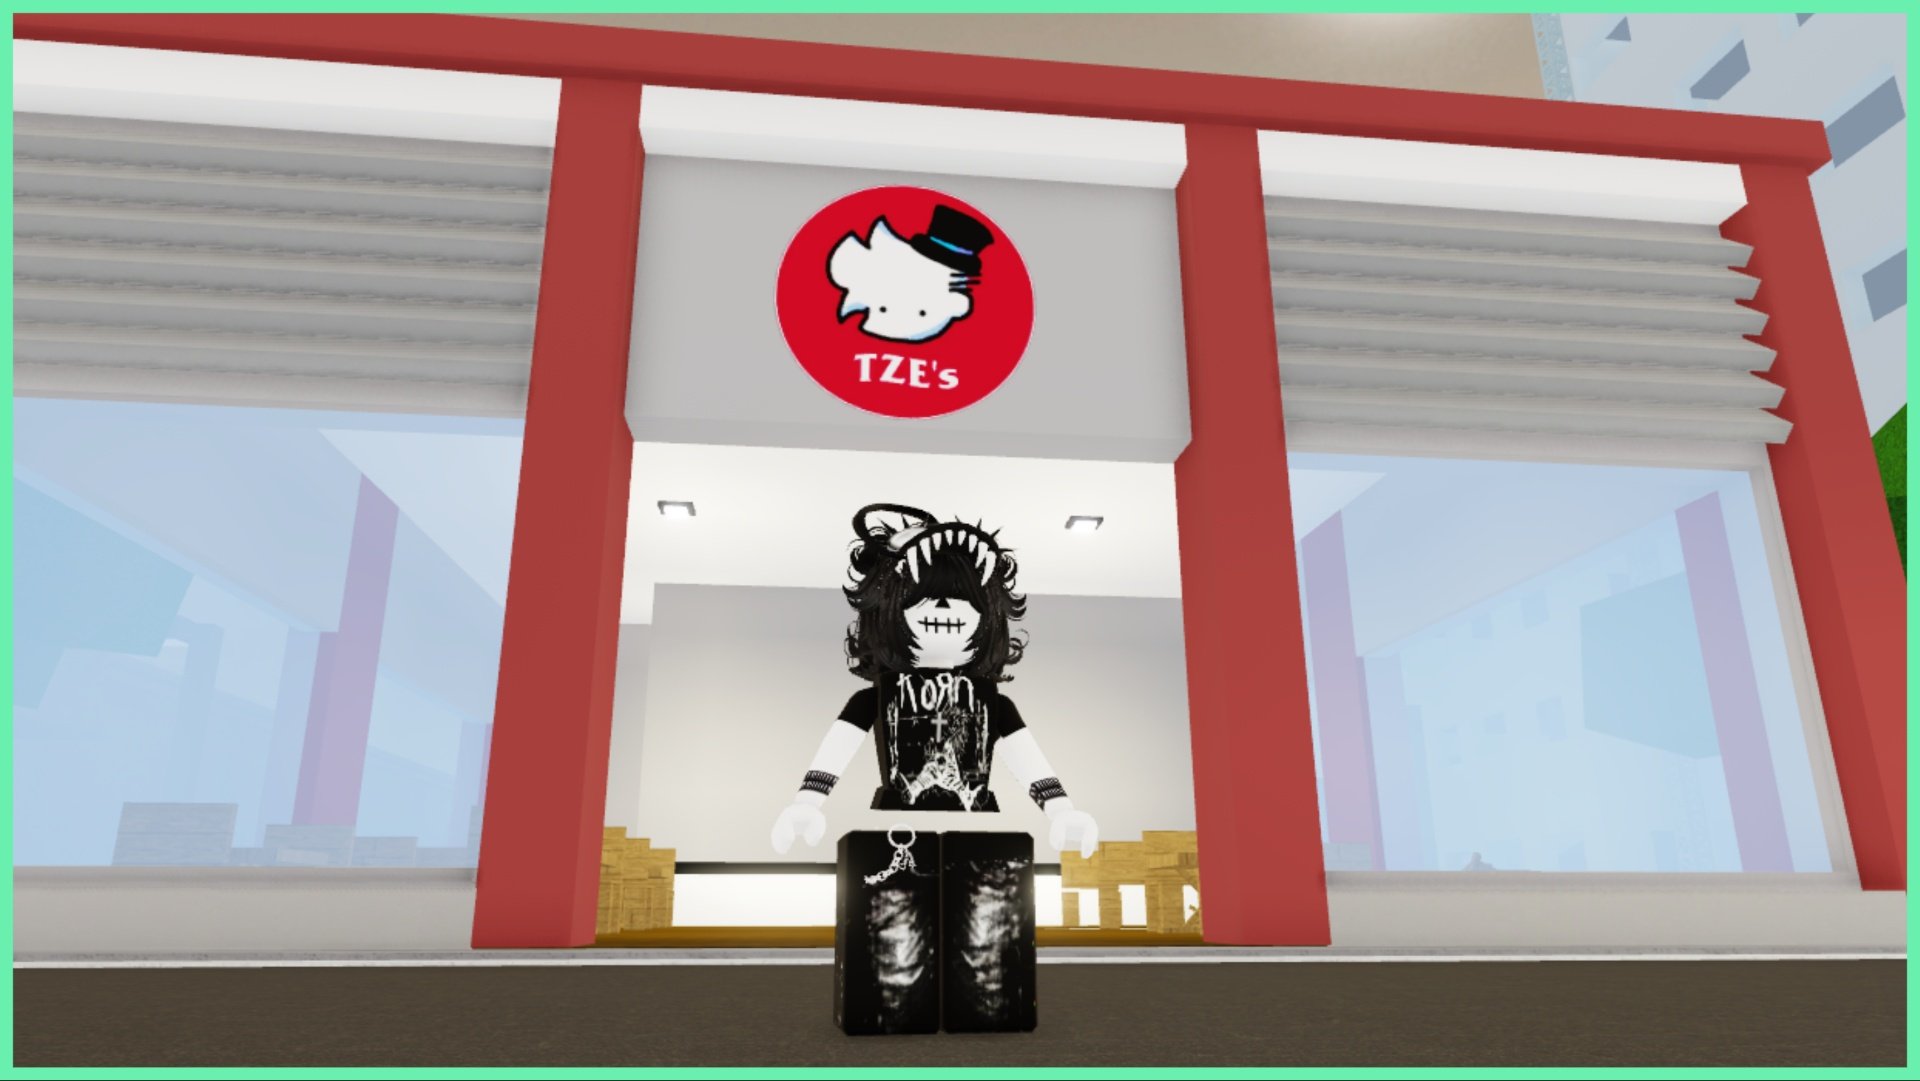 The image shows my avatar stood before a red and white building with a unique logo of a white head with a tophat.